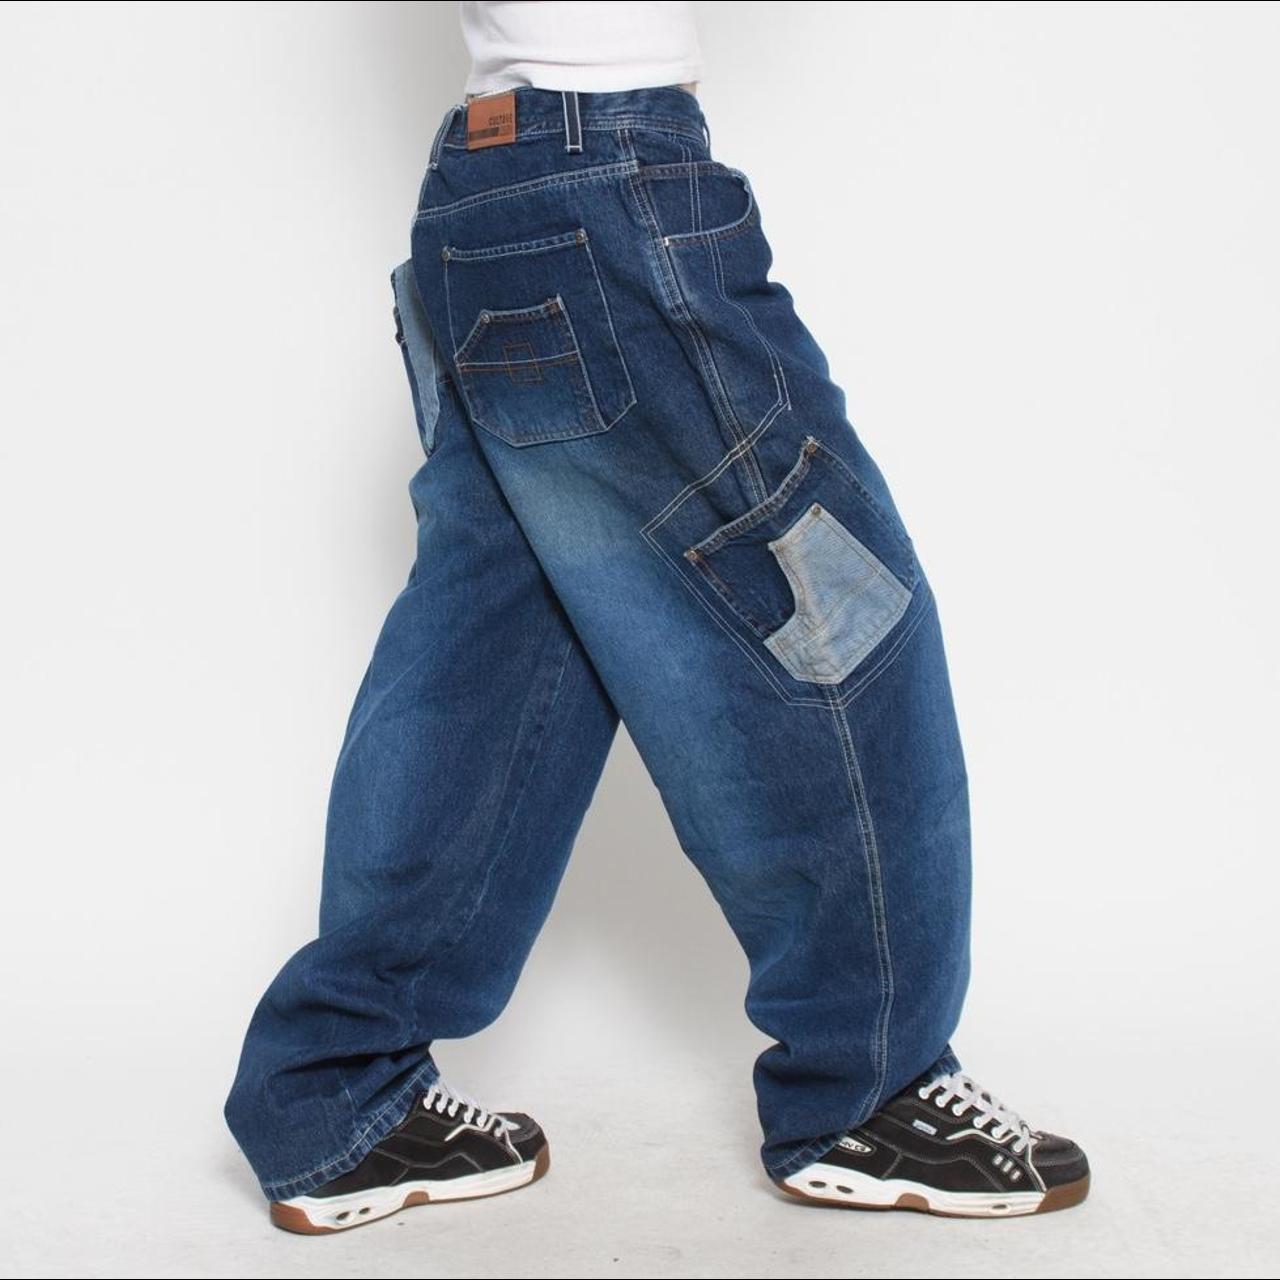 Cultura Men's Navy and Blue Jeans